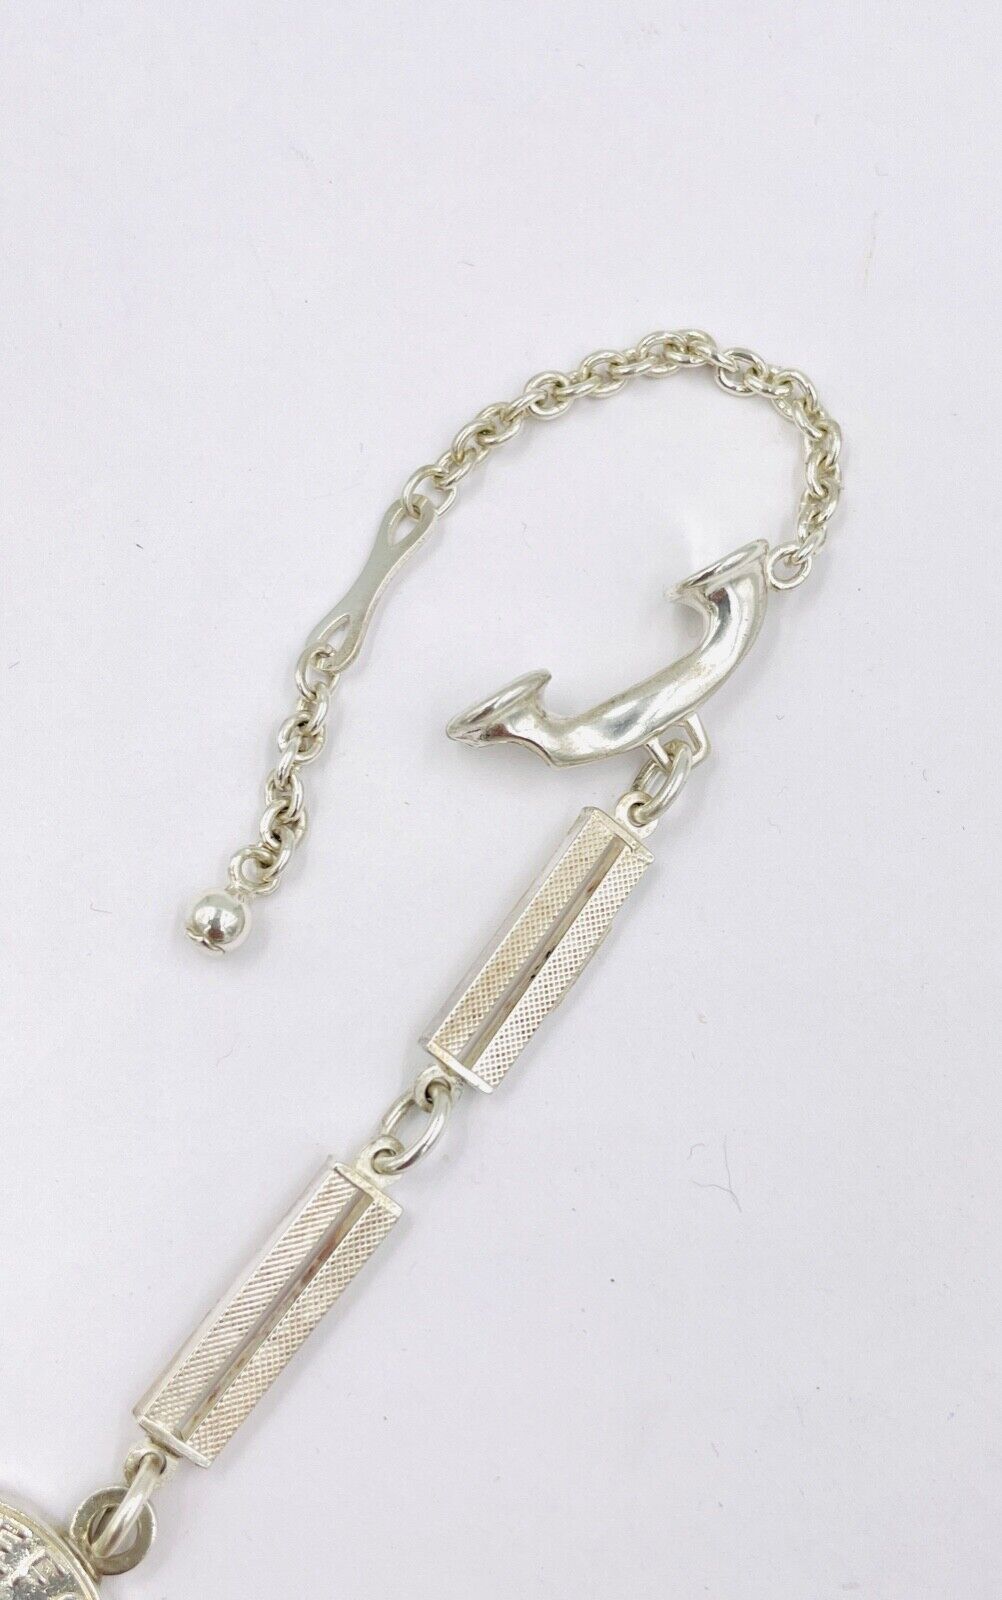 Vintage Sterling Silver Telephone Keychain Italy UNO A ERRE ITALIA